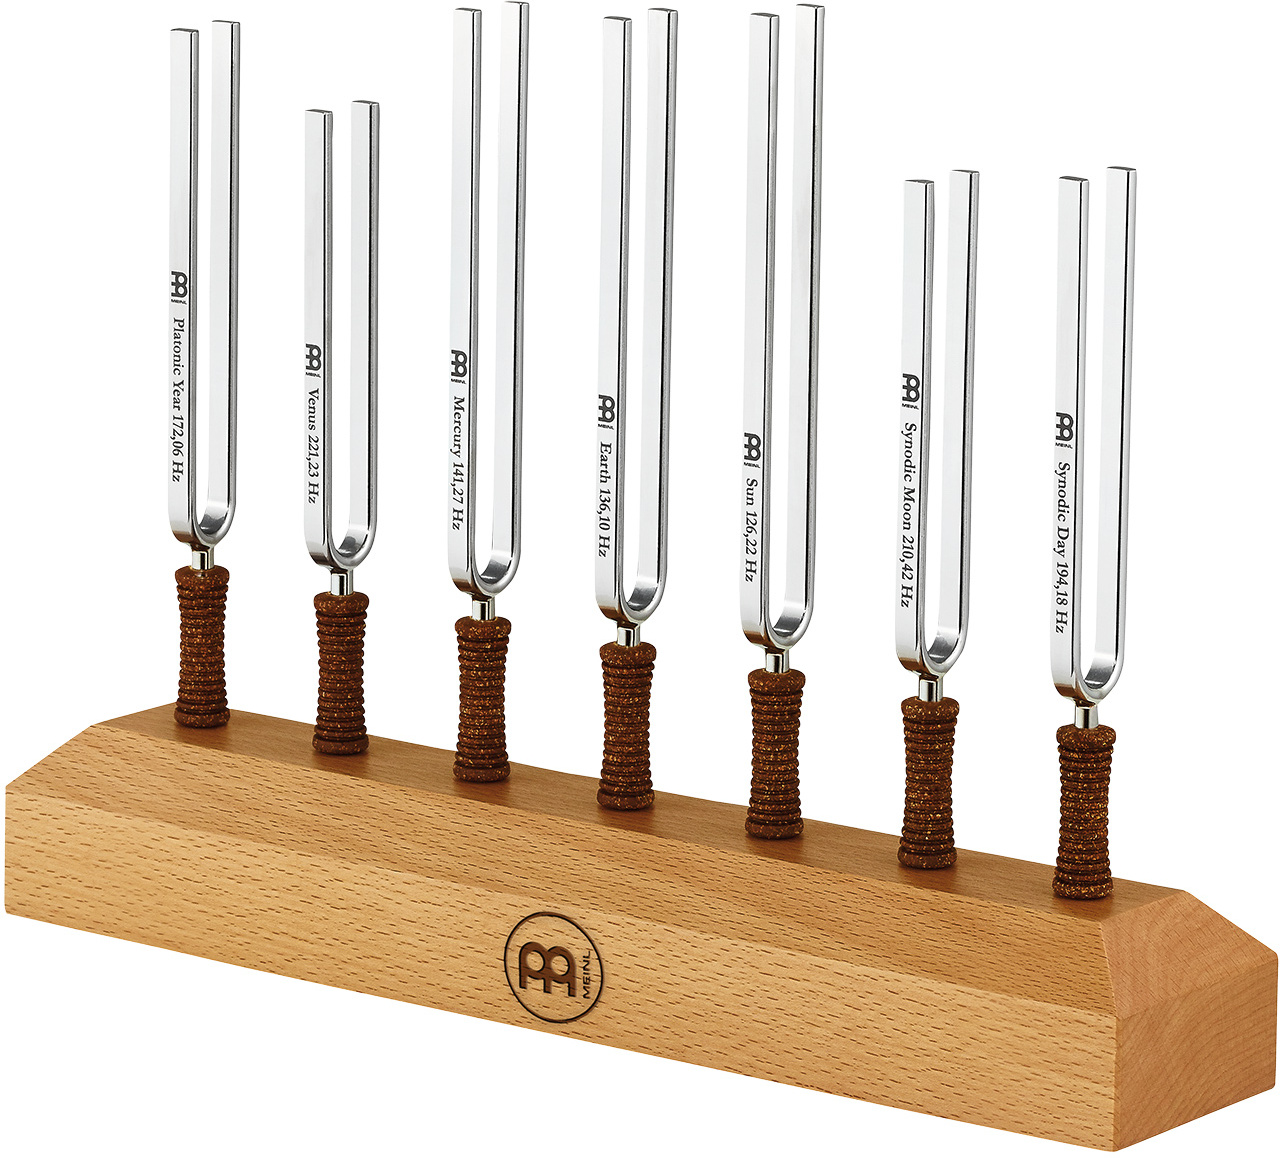 Meinl Support Bois Pour 7 Diapasons Sonic Energy - Tuning fork - Main picture